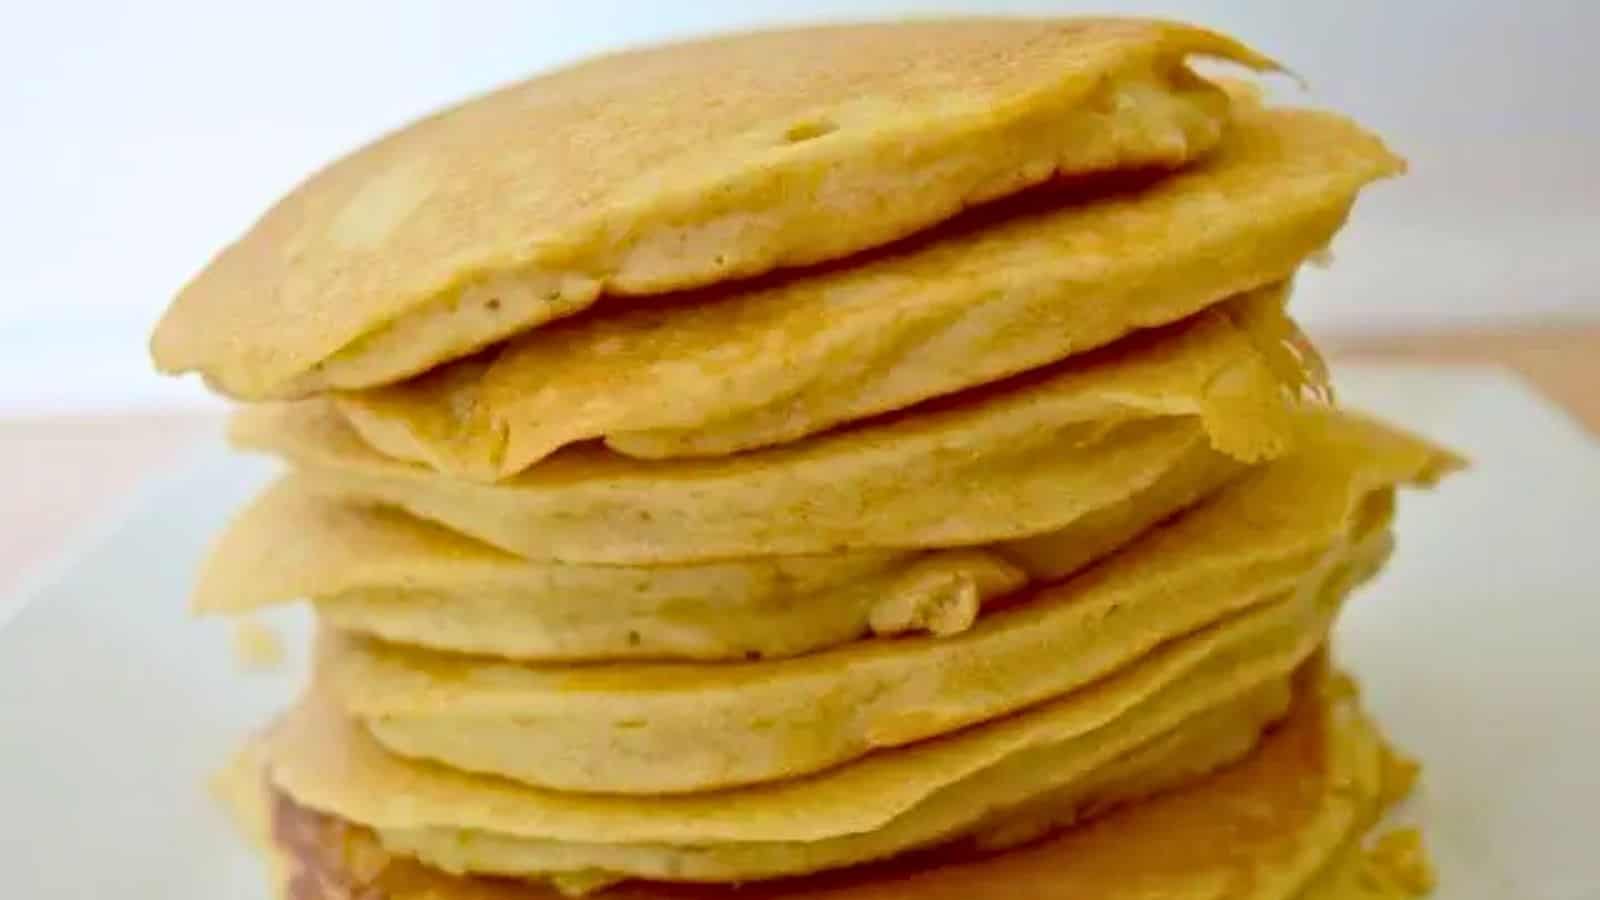 Image shows a close up of a stack of Oatmeal Pancakes on a white plate.